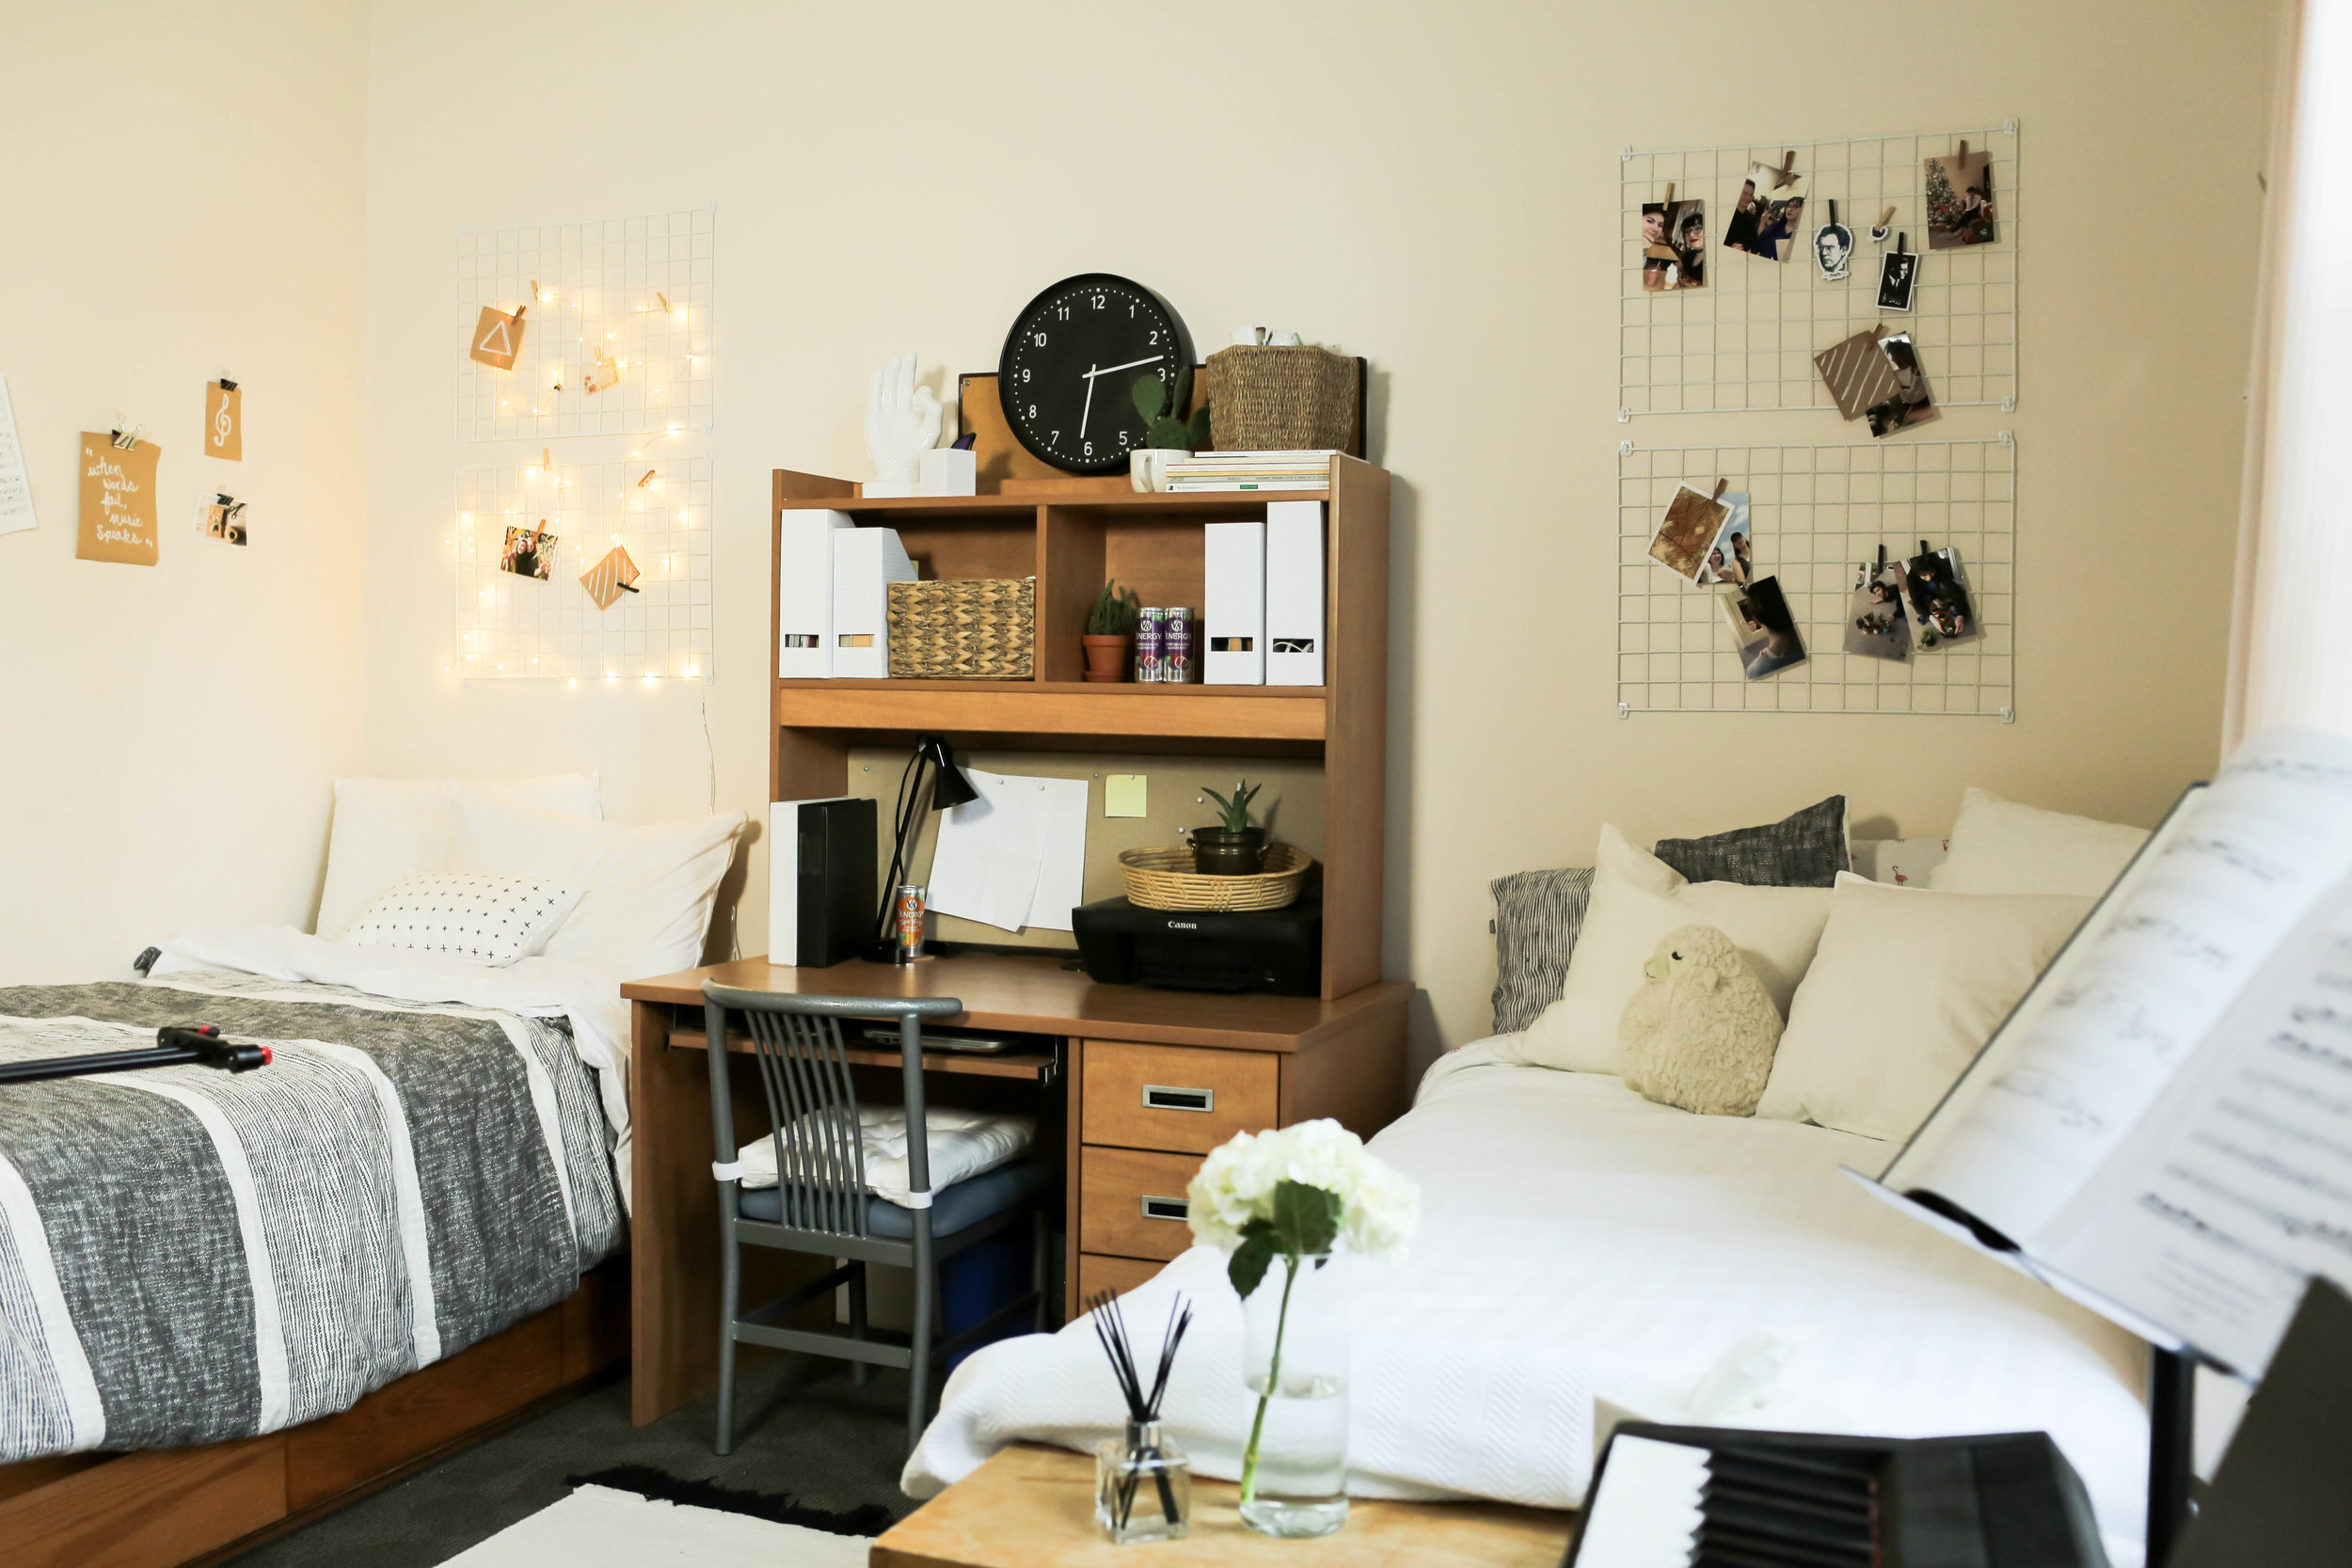 31 College Apartment Bedroom Ideas You Need to See - College Savvy